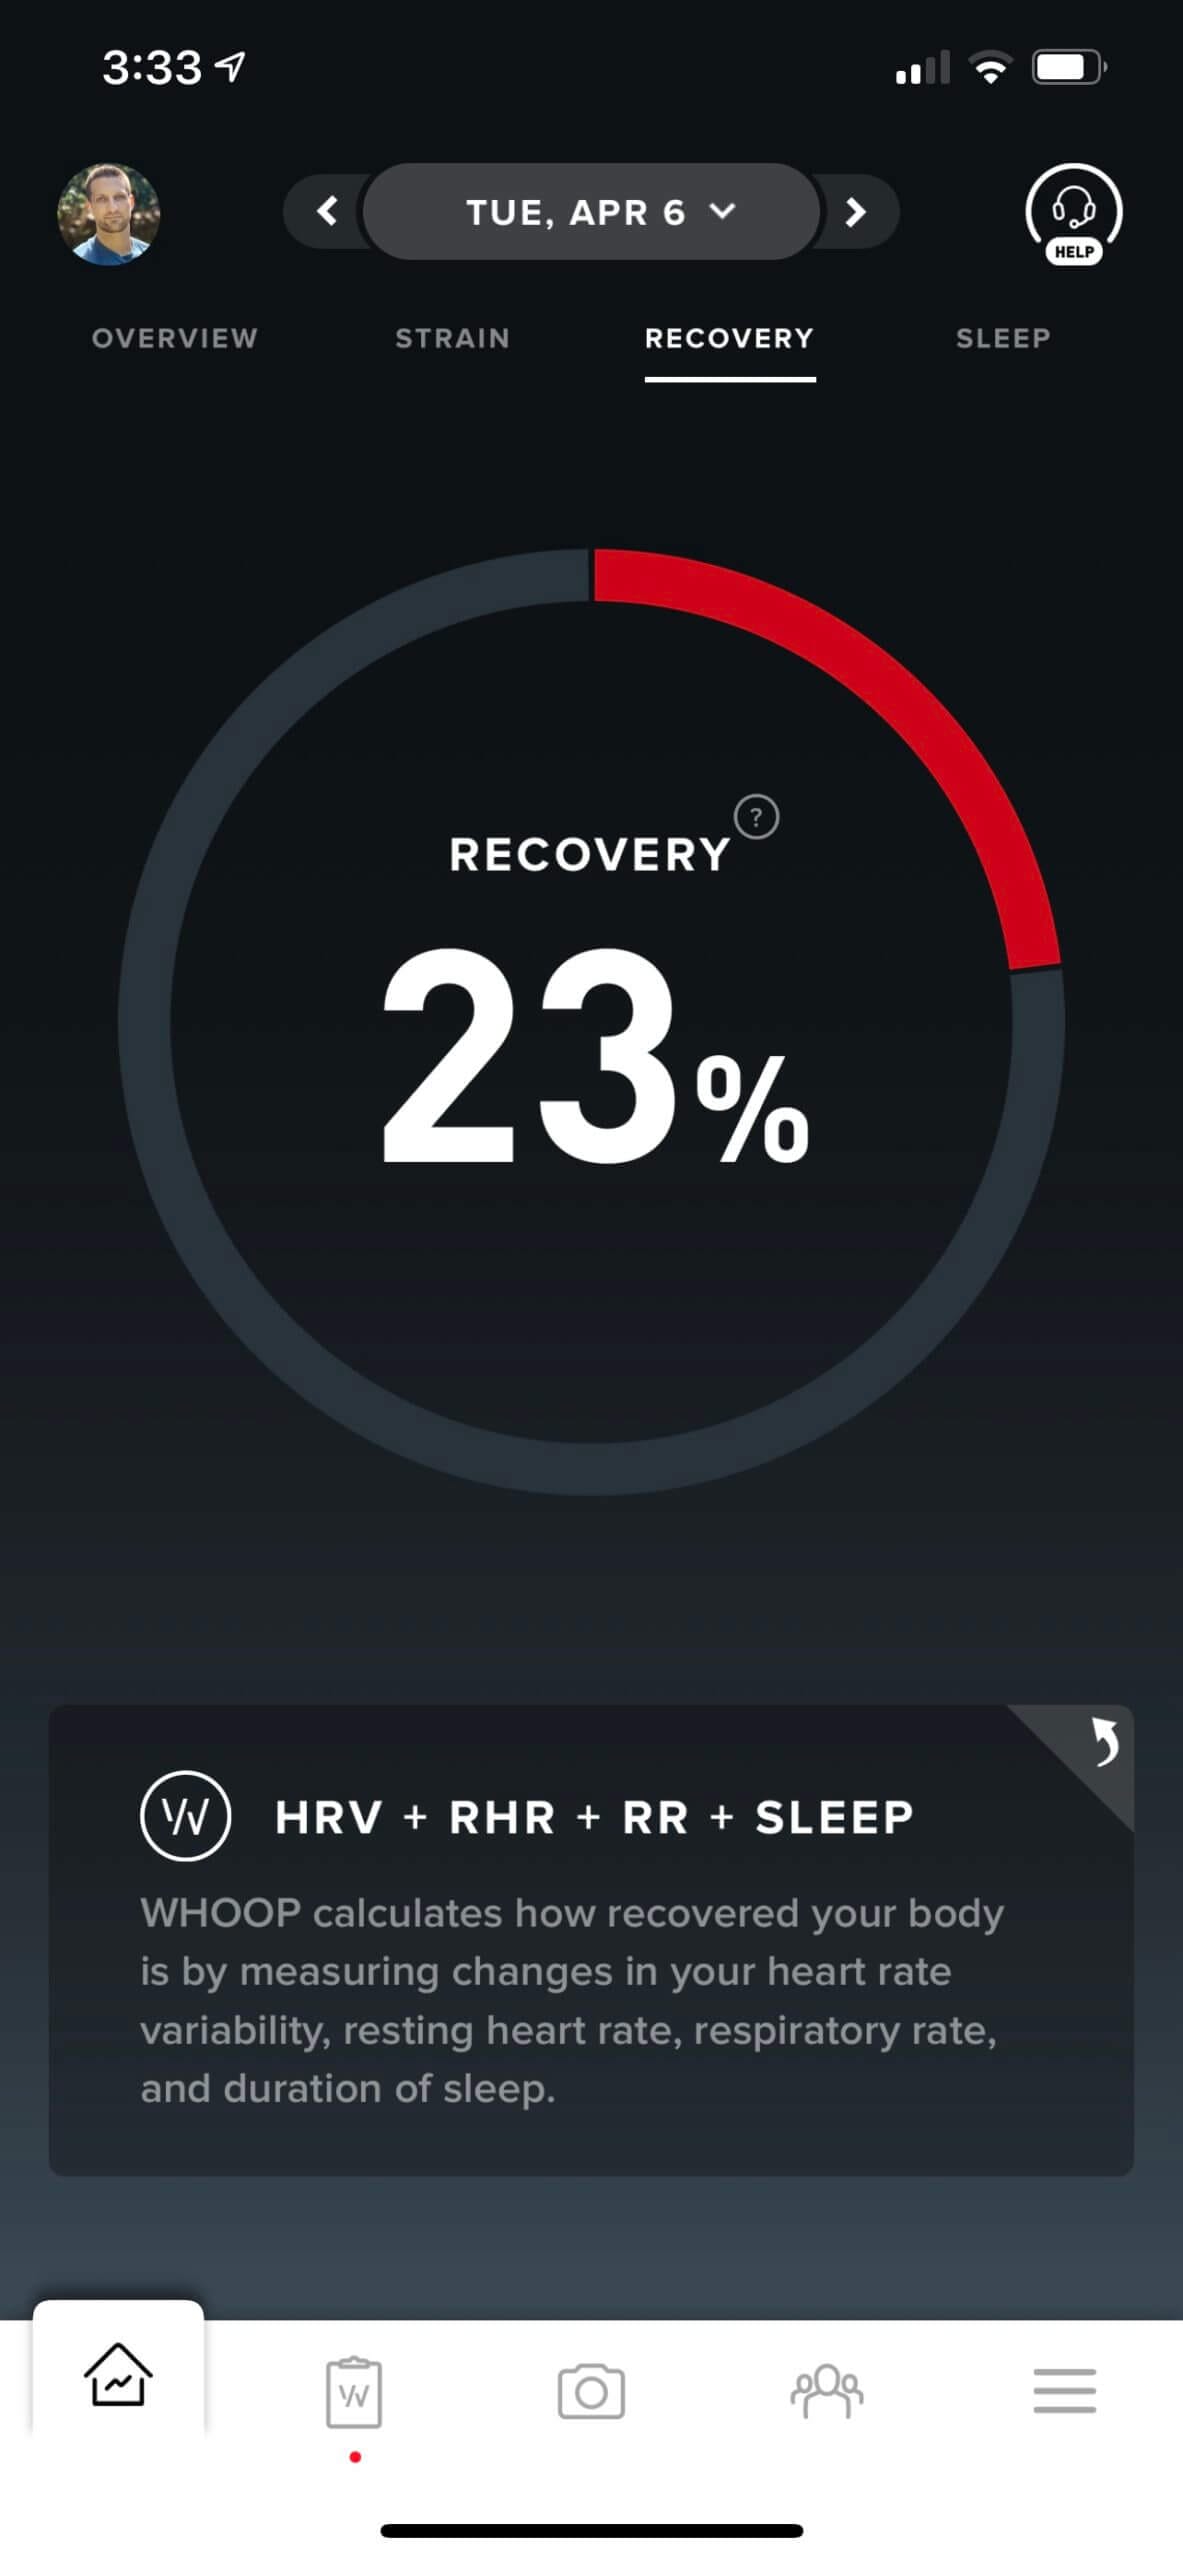 My low HRV and recovery scores.